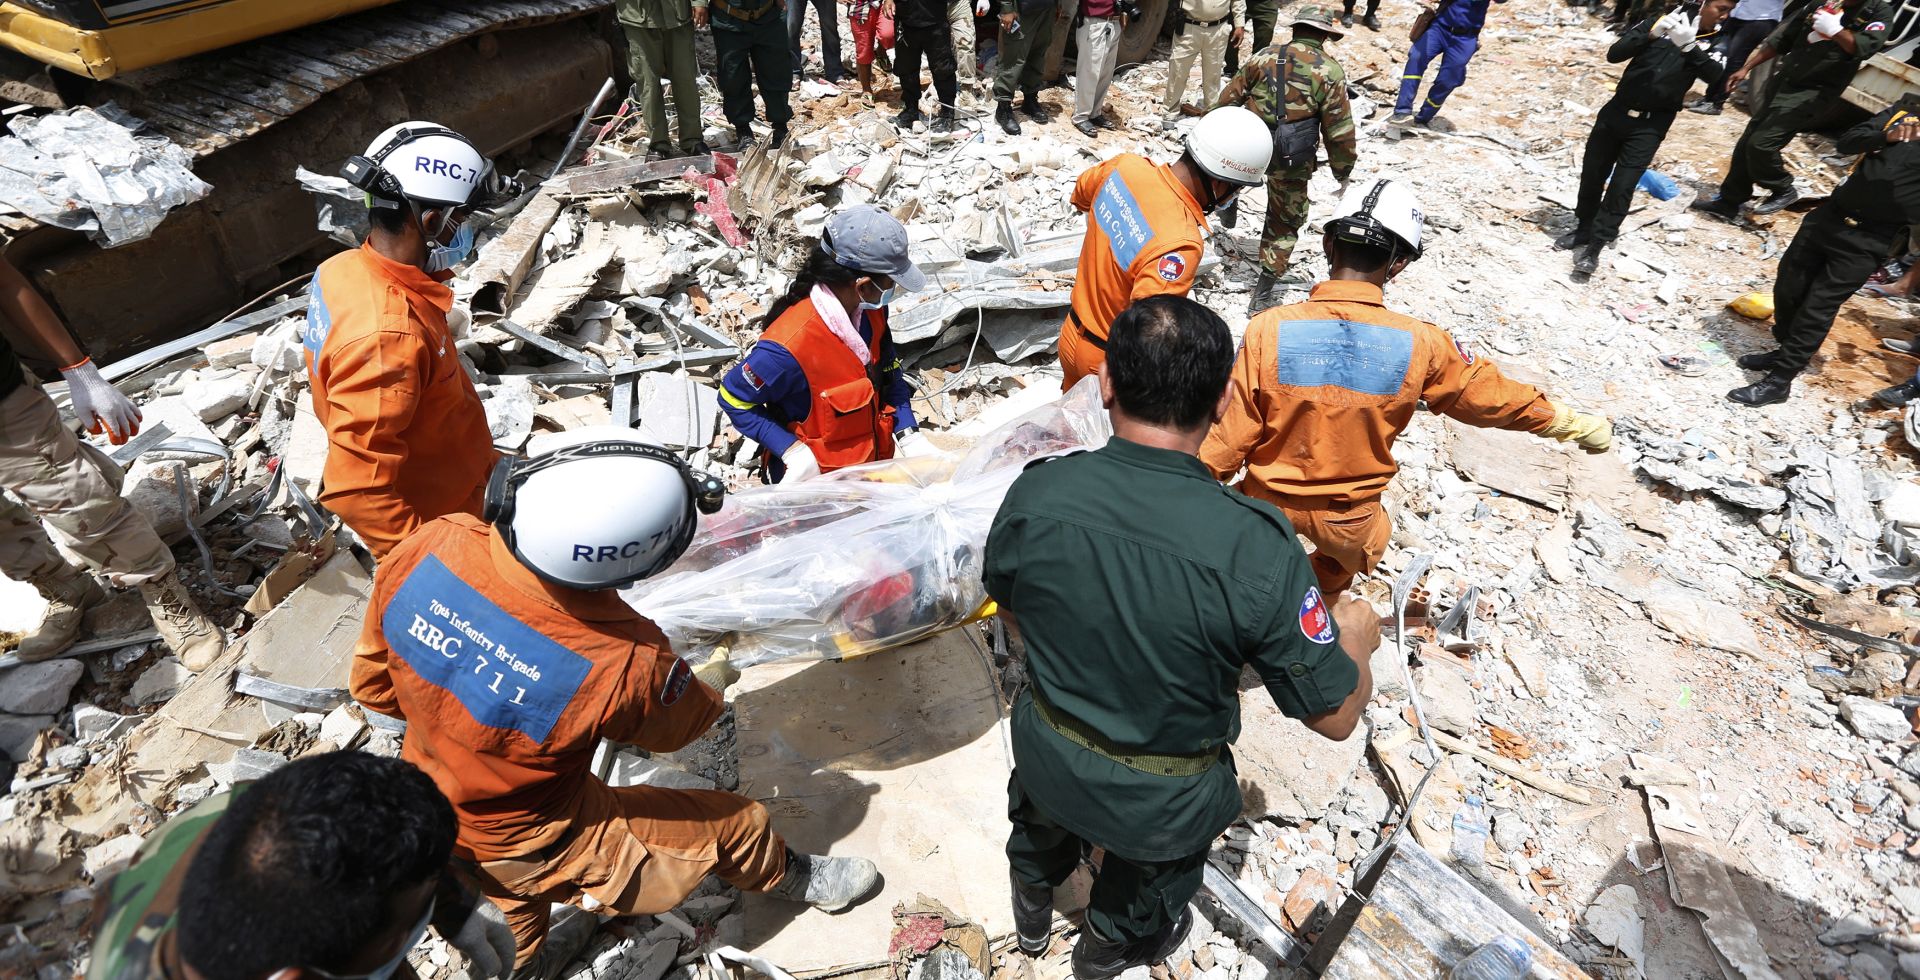 epa07667564 A Cambodian rescue team carries a worker's body at the site of a collapsed building on a construction site in Preah Sihanouk province, Cambodia, 23 June 2019. A new seven-storey building owned by a Chinese company, collapsed in Preah Sihanouk province, killing at least 18 workers and leaving 24 workers injured, according to reports.  EPA/KITH SEREY